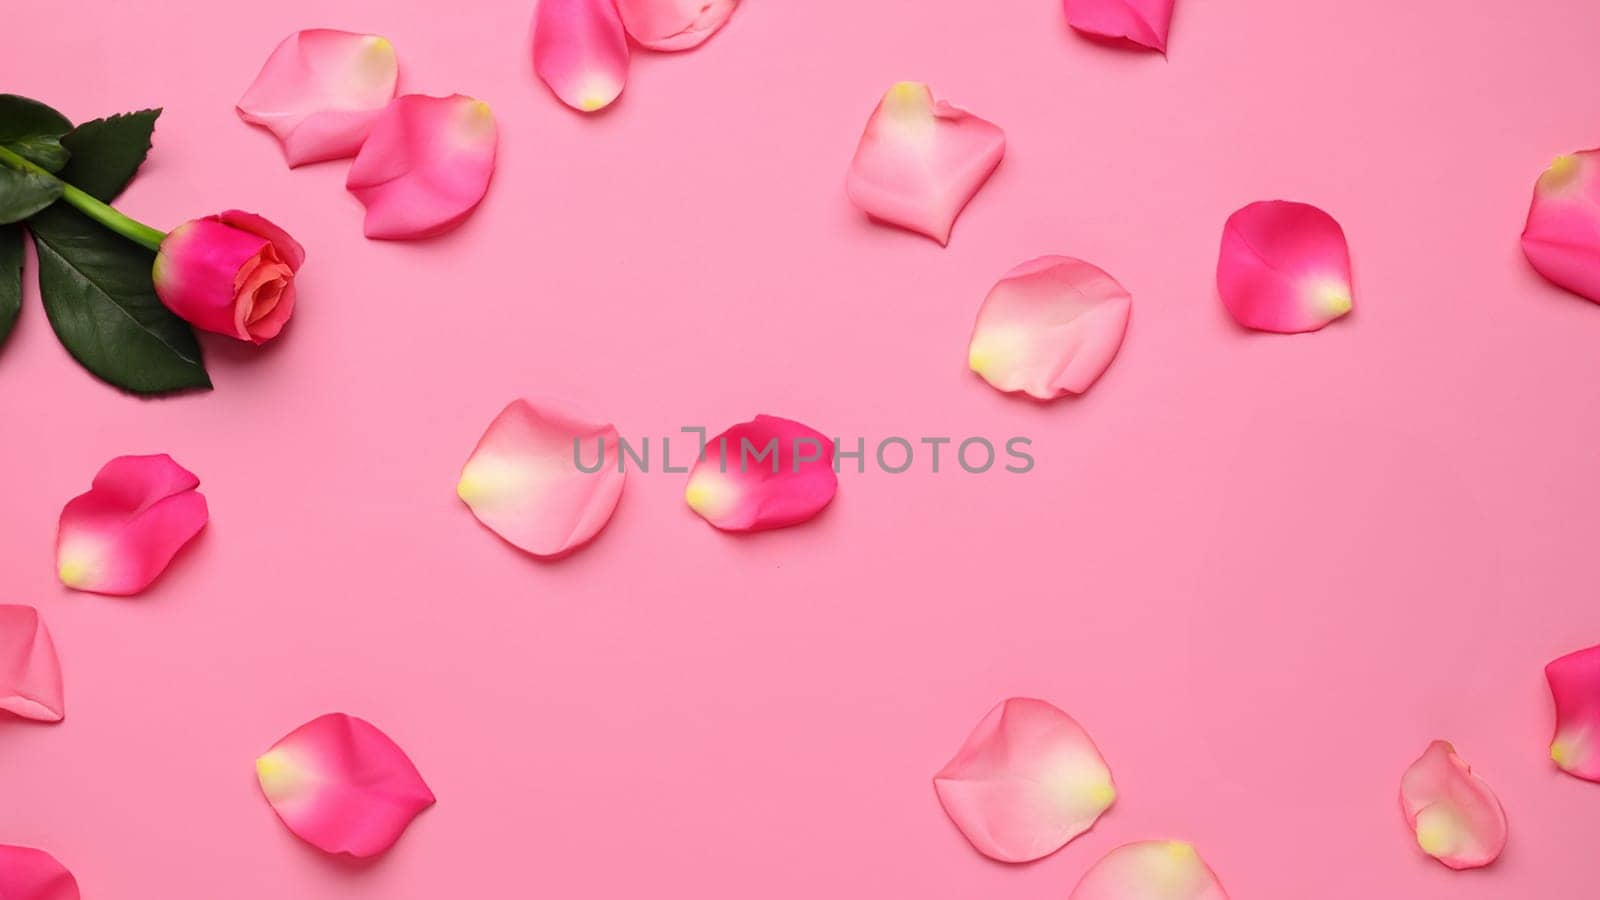 Scattered Rose Petals on Pink Backdrop, top view, flat lay by DesignMarjolein